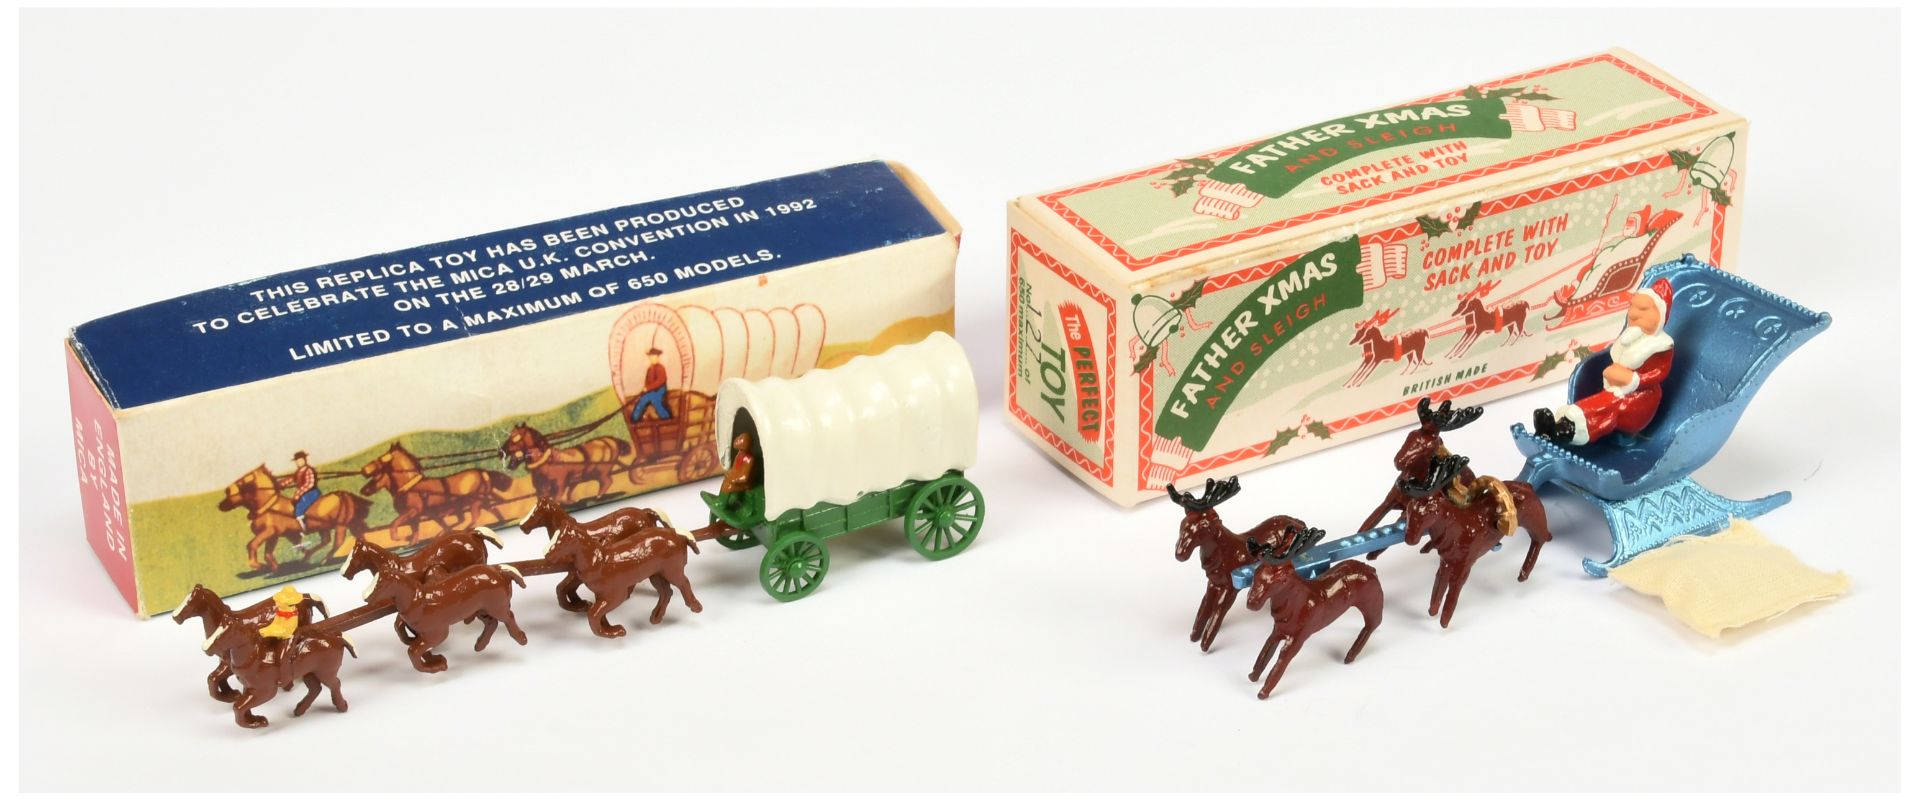 Matchbox Models of Yesteryear "The Perfect Toy" Pair (1) Covered Wagon  - Green, white canopy, br...